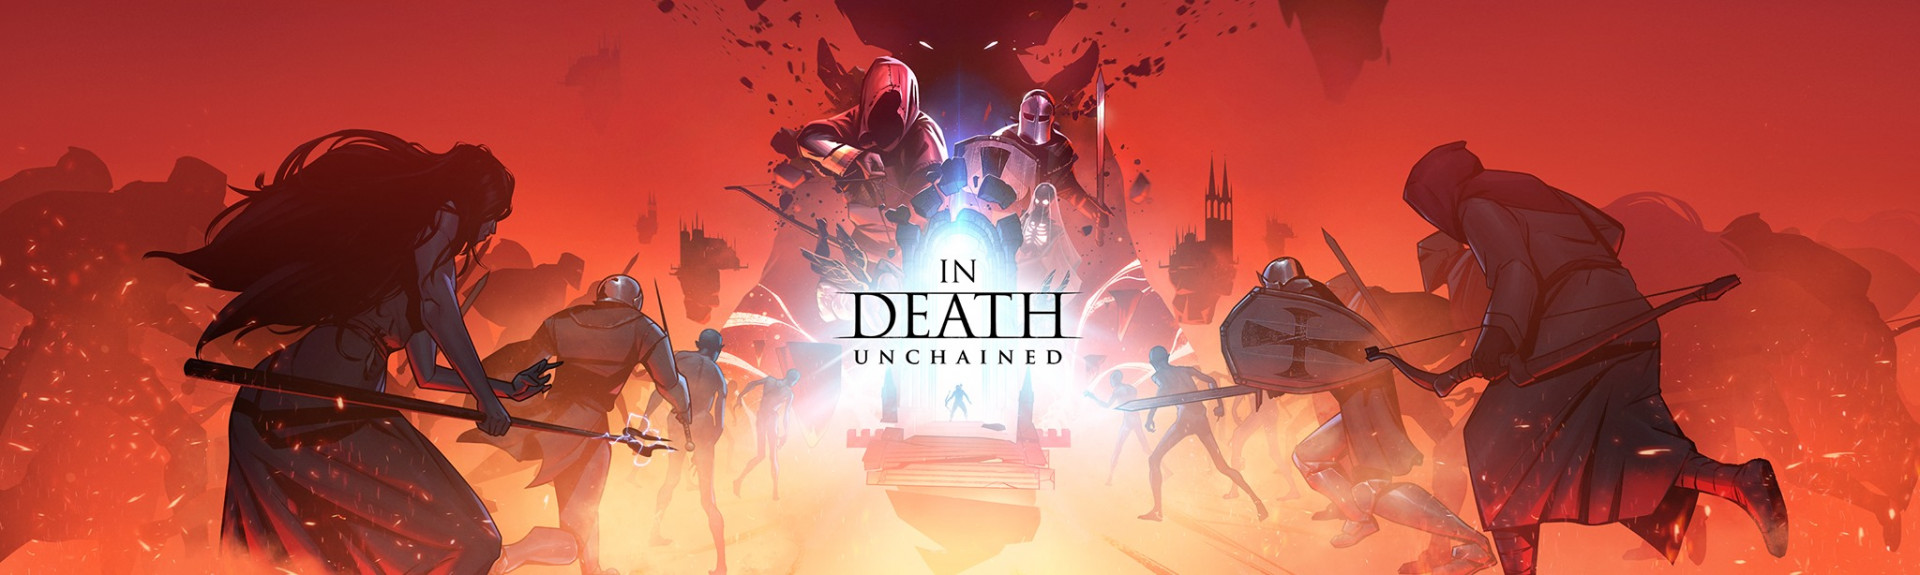 In Death: Unchained - ANÁLISIS